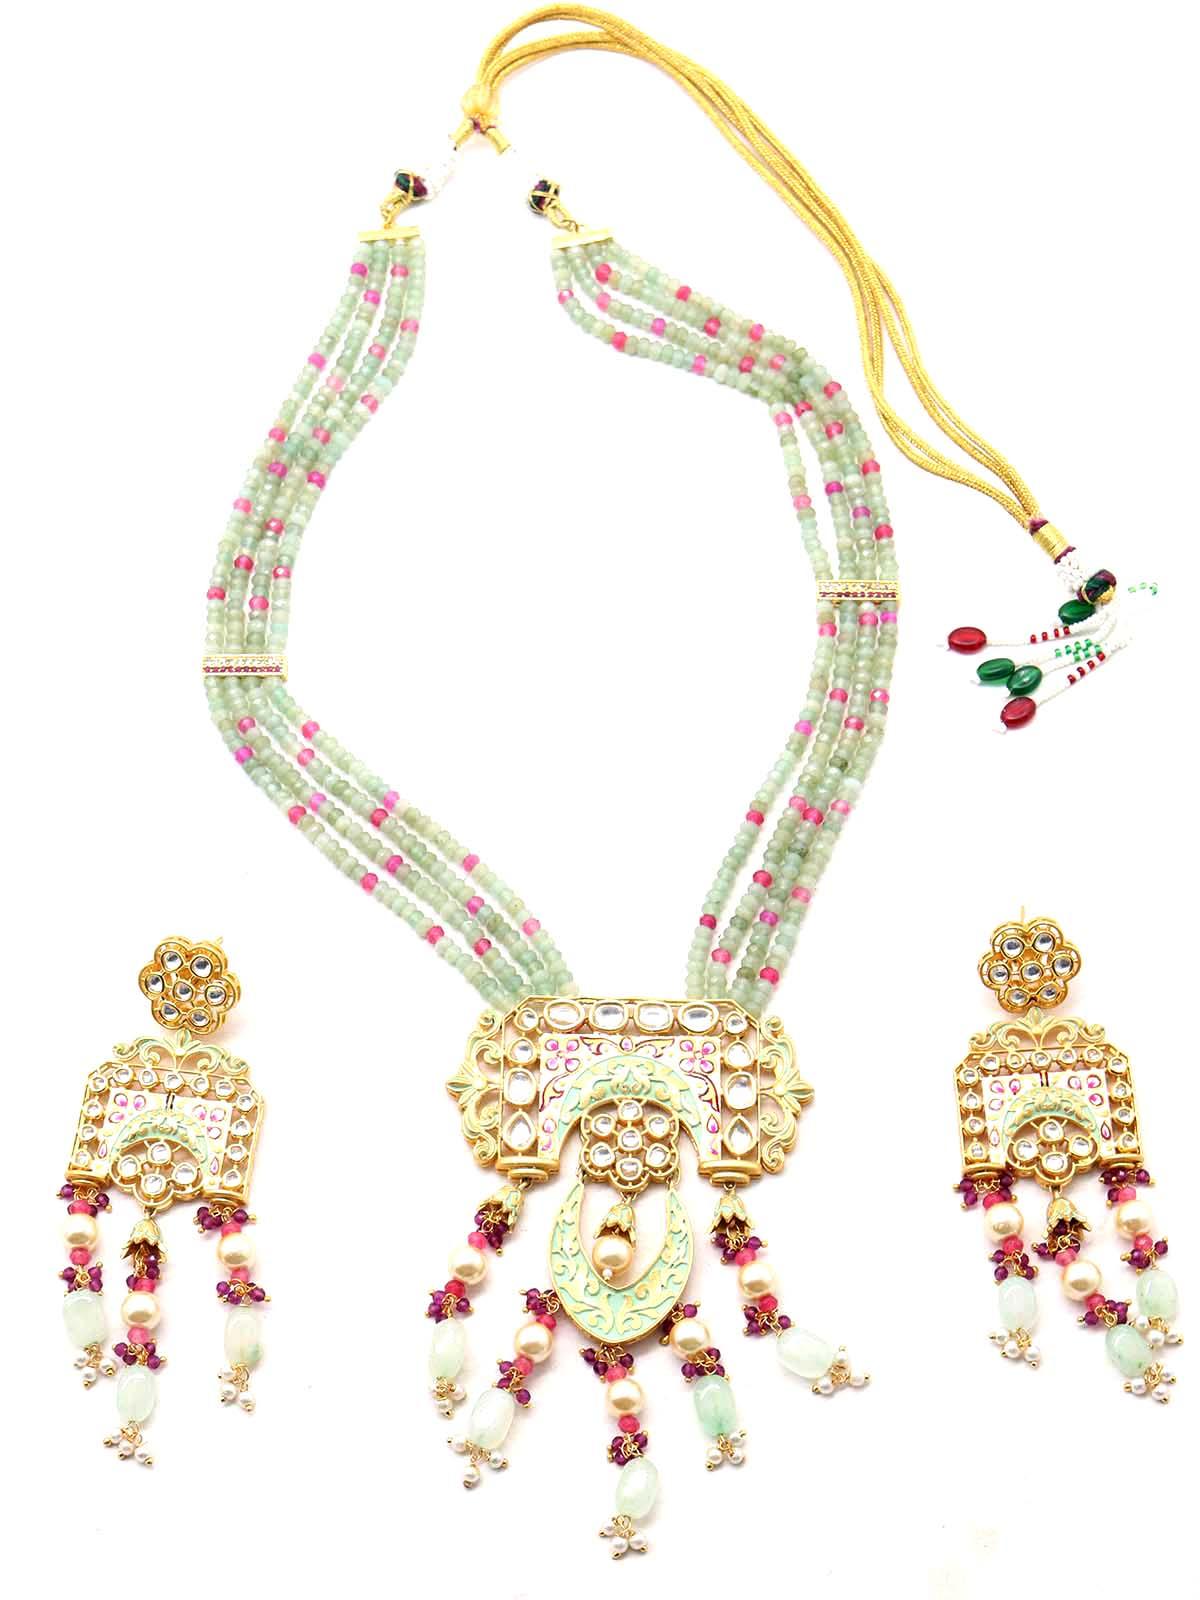 Women's Long Authentic Green And Pink Onyx And Mani Semi-Precious Necklace With Earrings! - Odette